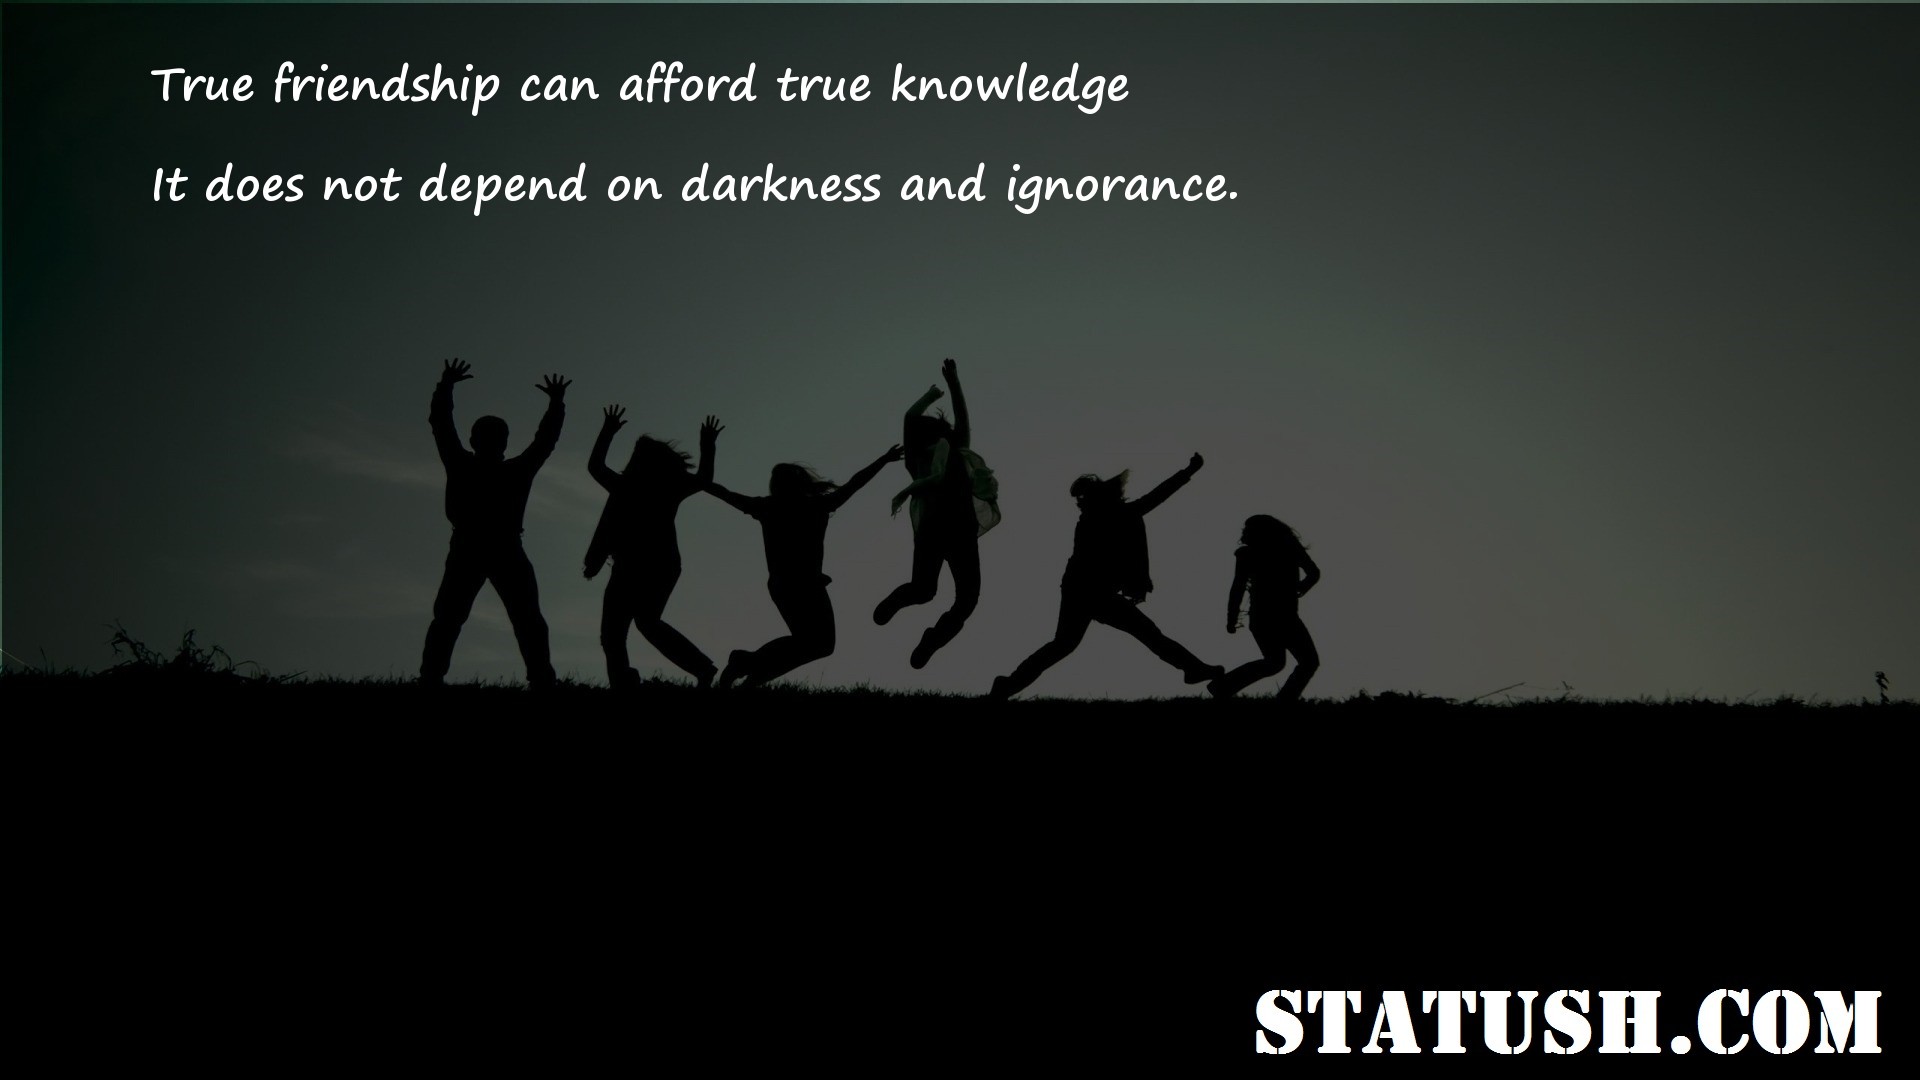 True friendship can afford true knowledge Friendship Quotes at statush.com